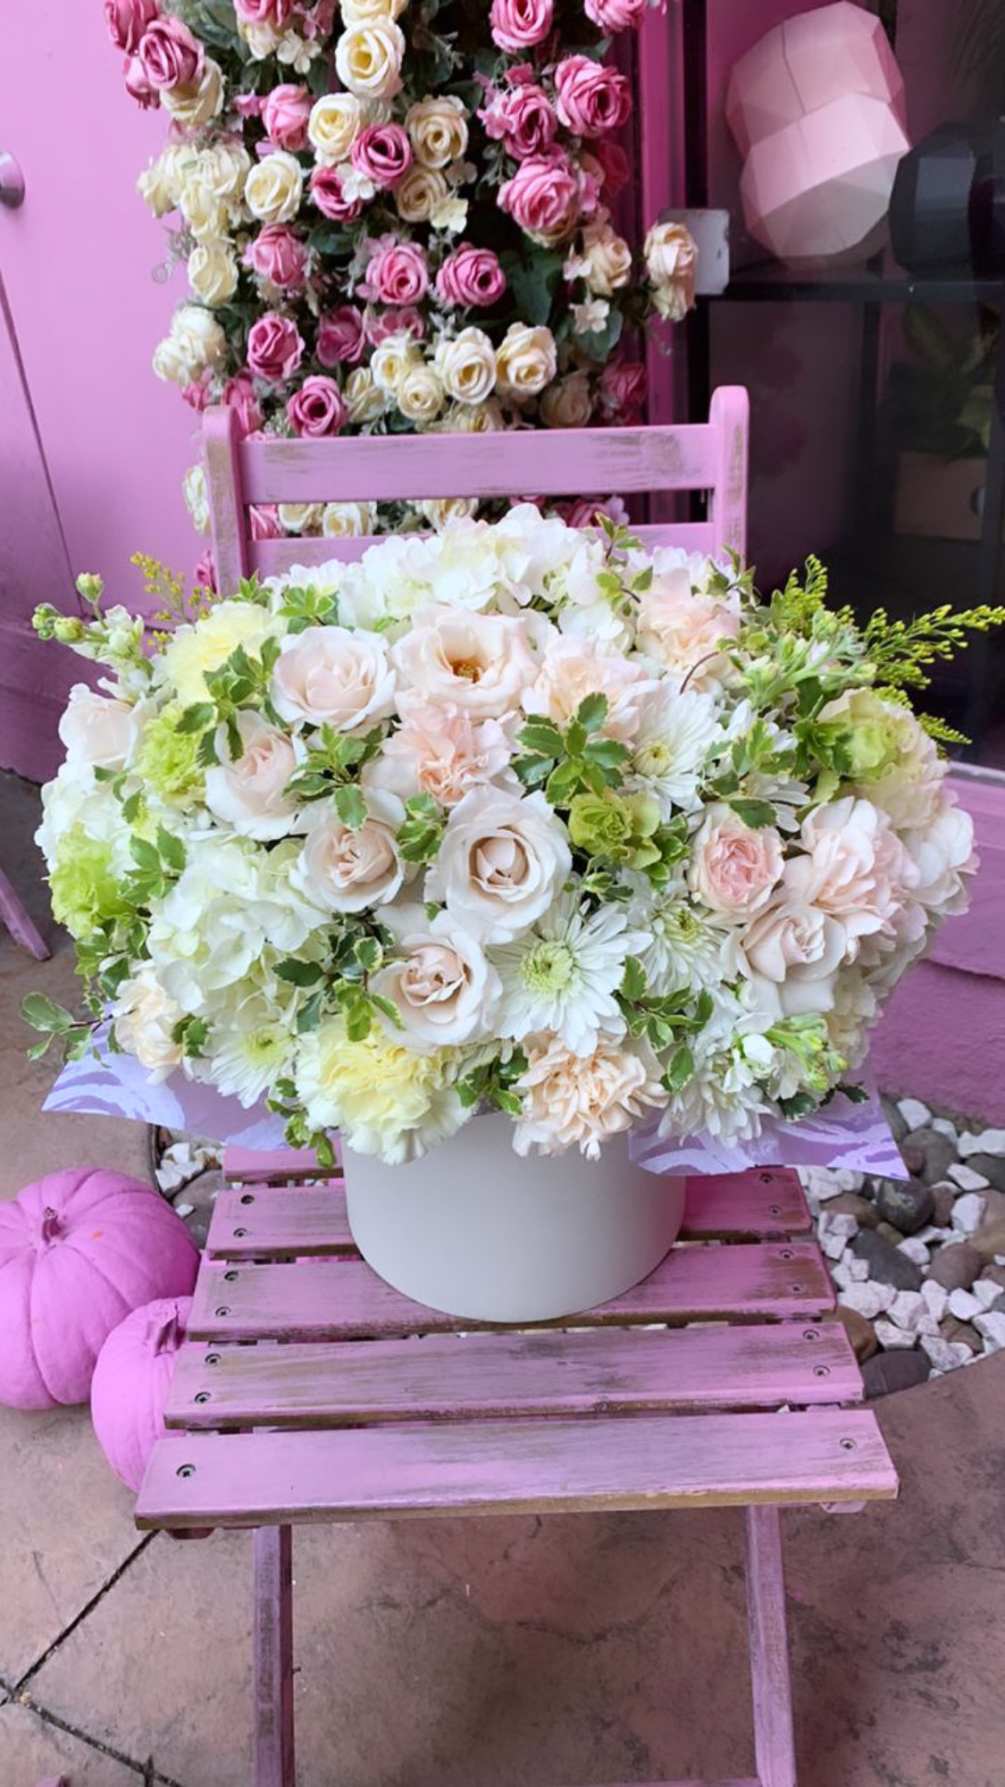 A delightful mix of roses, spray roses, and lush greenery that&#039;s perfect